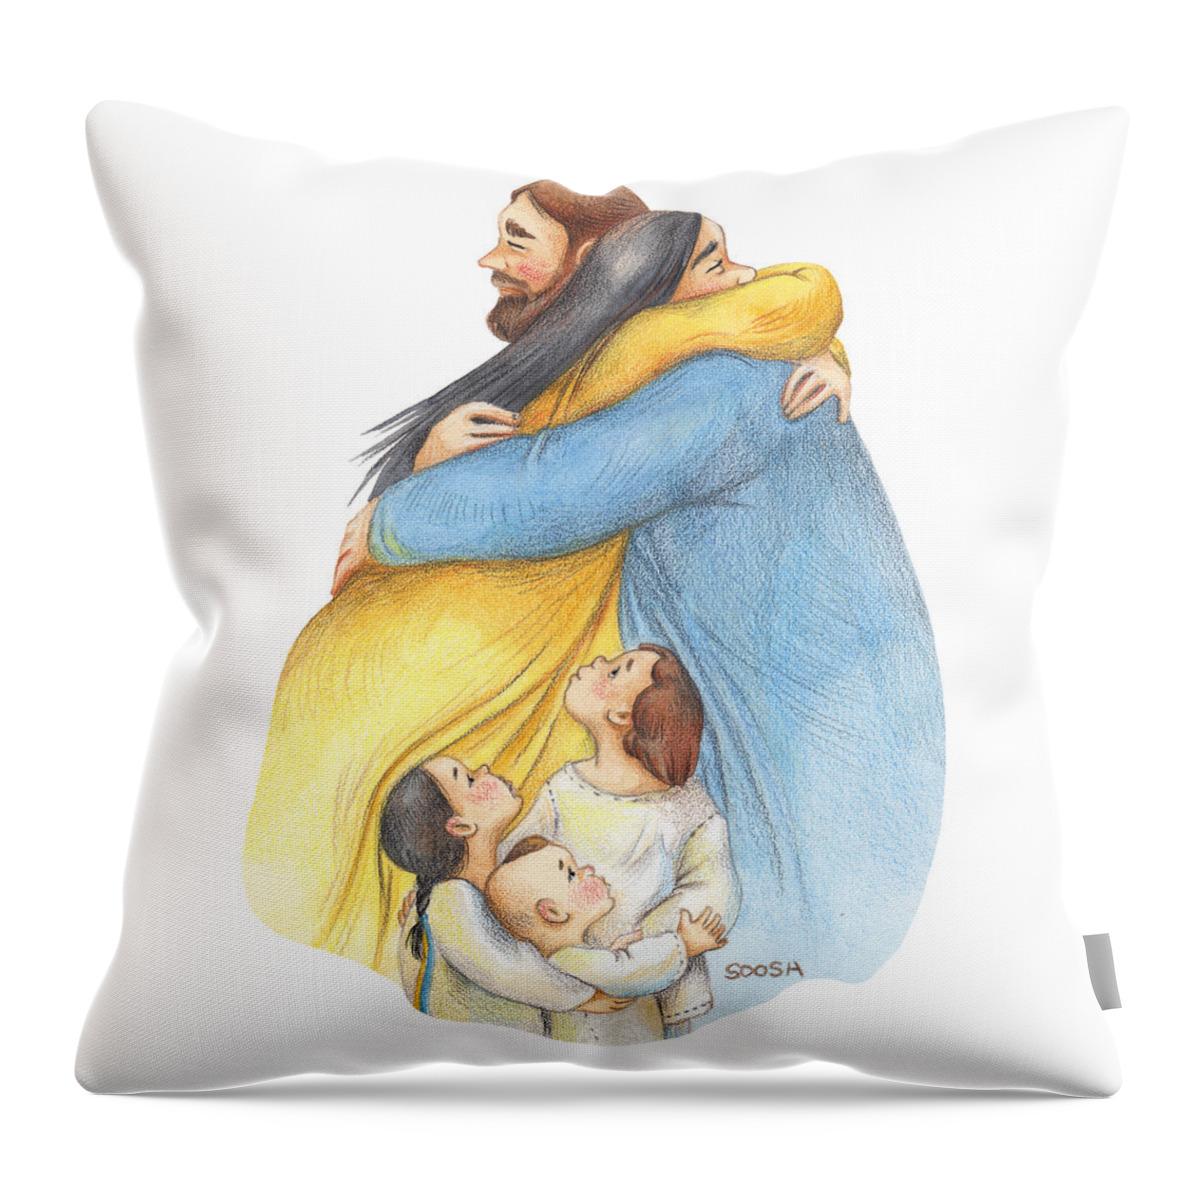 Soosh Throw Pillow featuring the drawing Together by Soosh